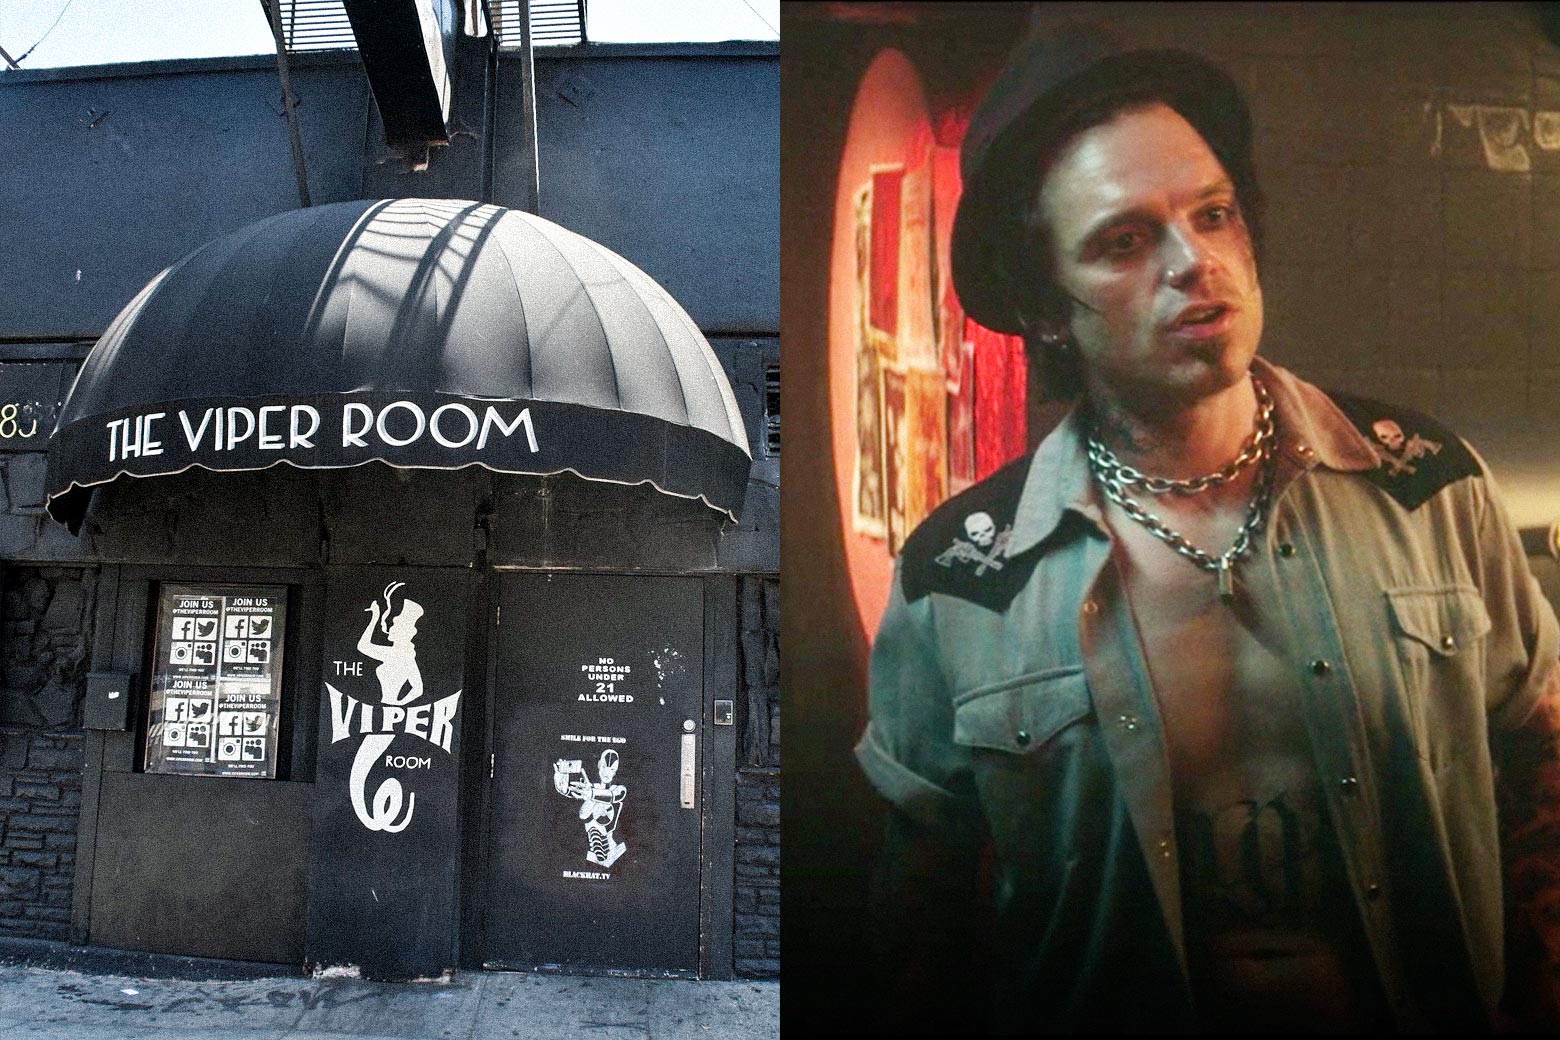 Diptych of the Viper Room awning and Stan as Tommy Lee wearing a black hat and a shirt open to his bare chest